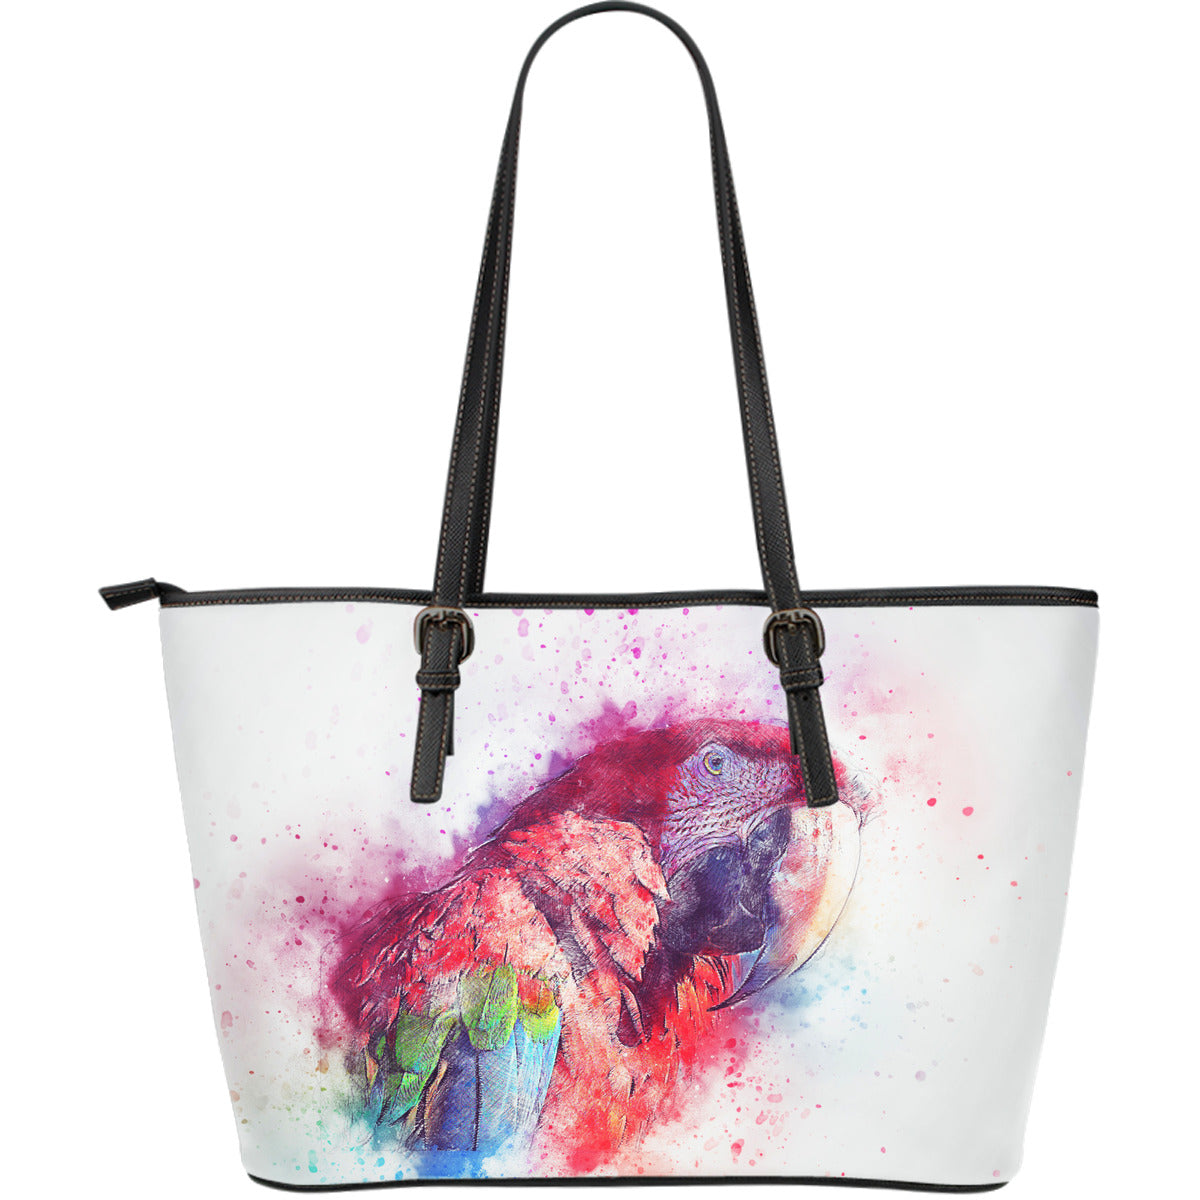 Leather Tote Bag - Large Parrot - JaZazzy 